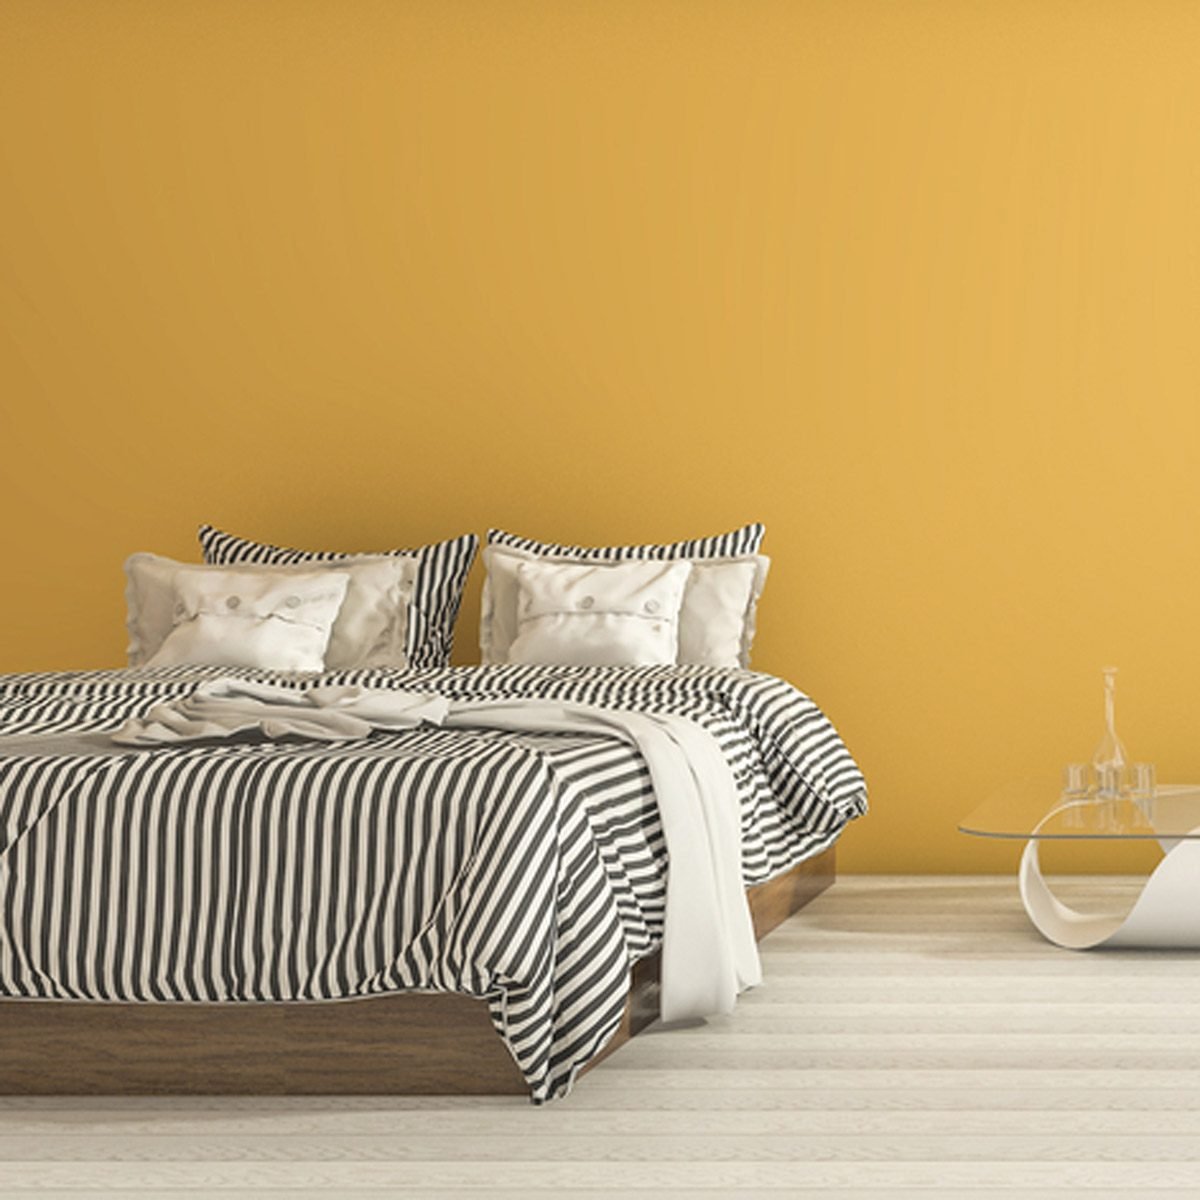 12 Hot Color Trends for the Bedroom